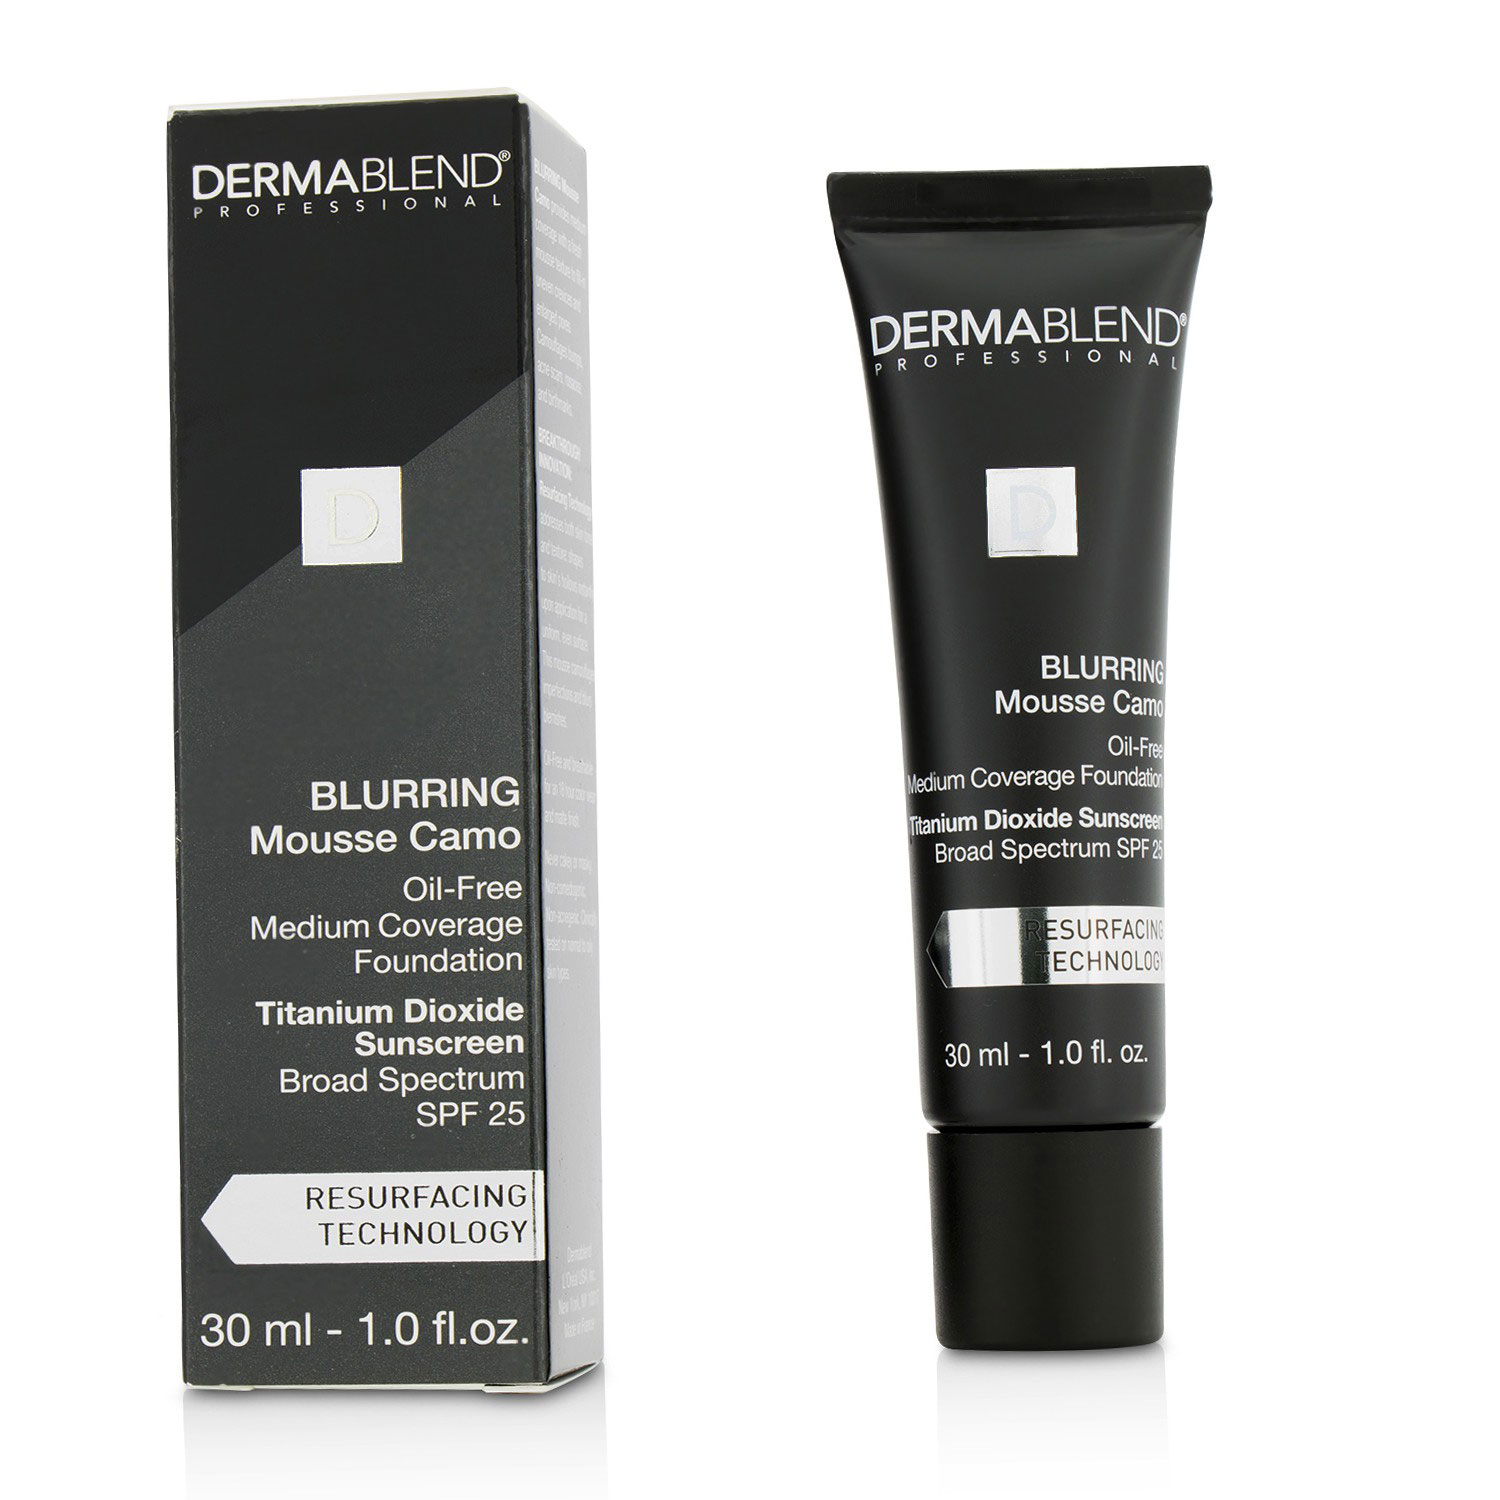 Blurring Mousee Camo Oil Free Foundation SPF 25 (Medium Coverage) - #15C Buff Dermablend Image